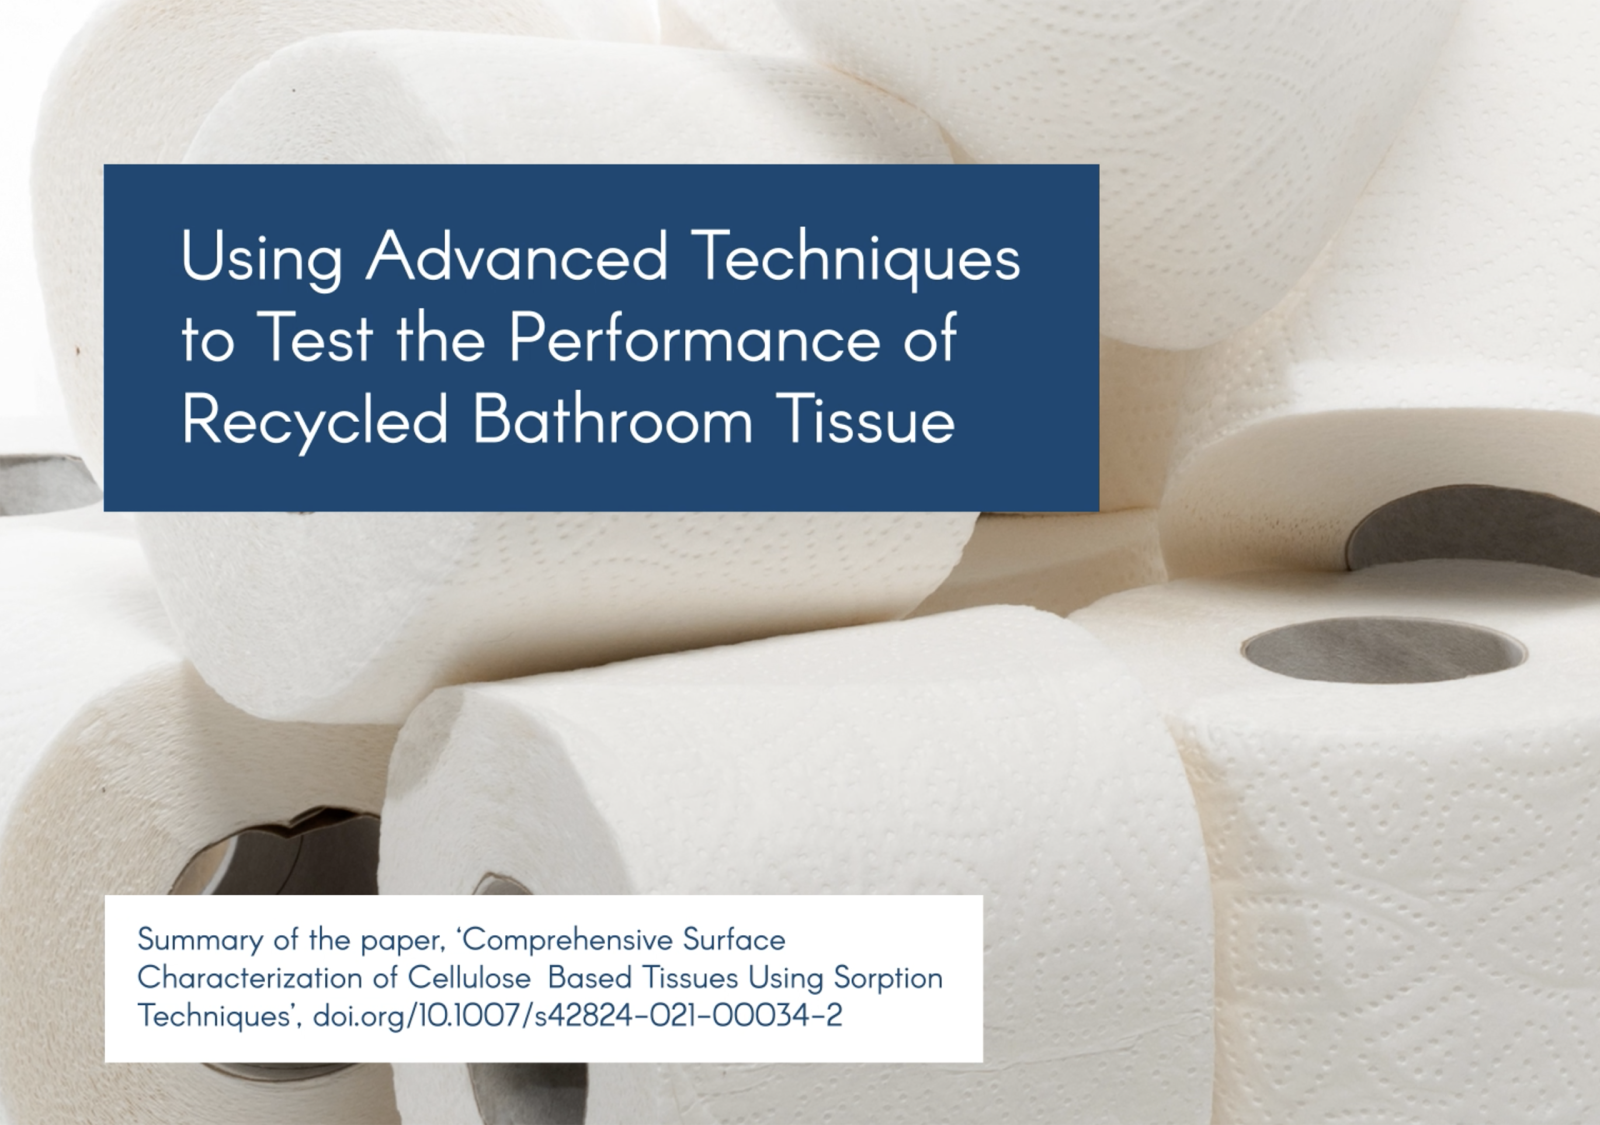 Dr Anett Kondor | Using Advanced Techniques to Test the Performance of Recycyled Bathroom Tissue